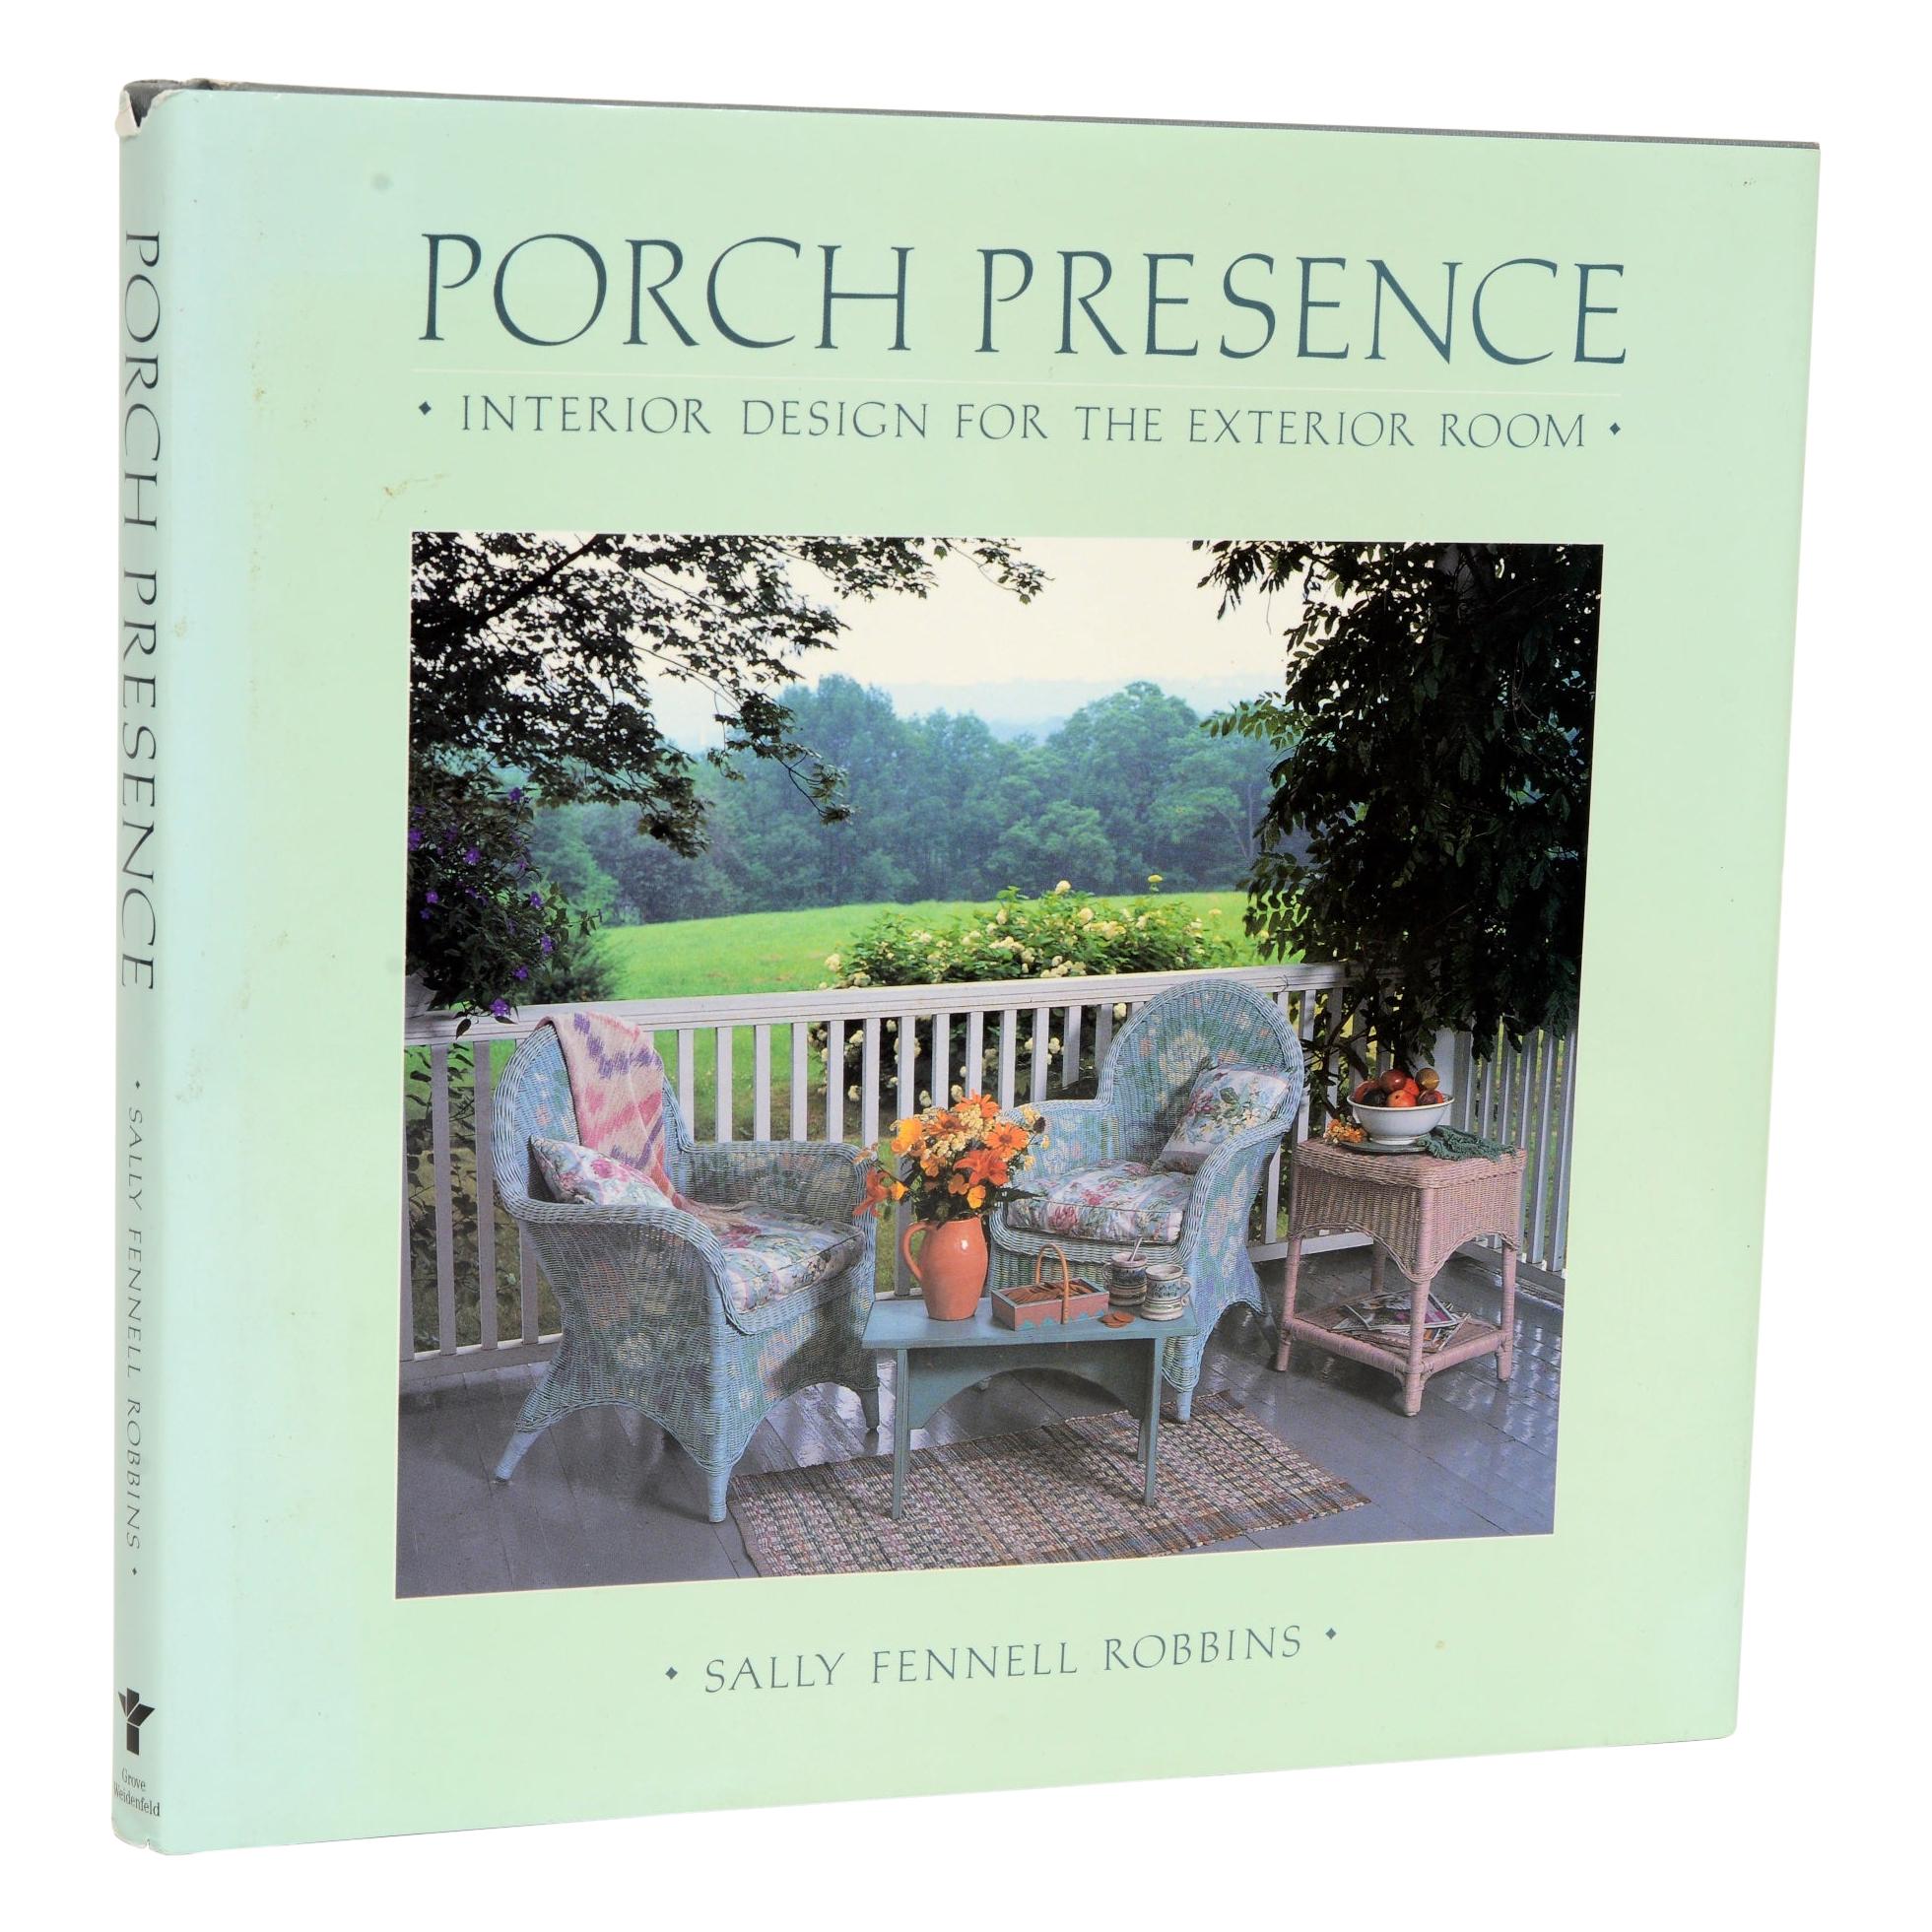 Porch Presence Interior Design for the Exterior Room, Sally Fennell, 1st Edition